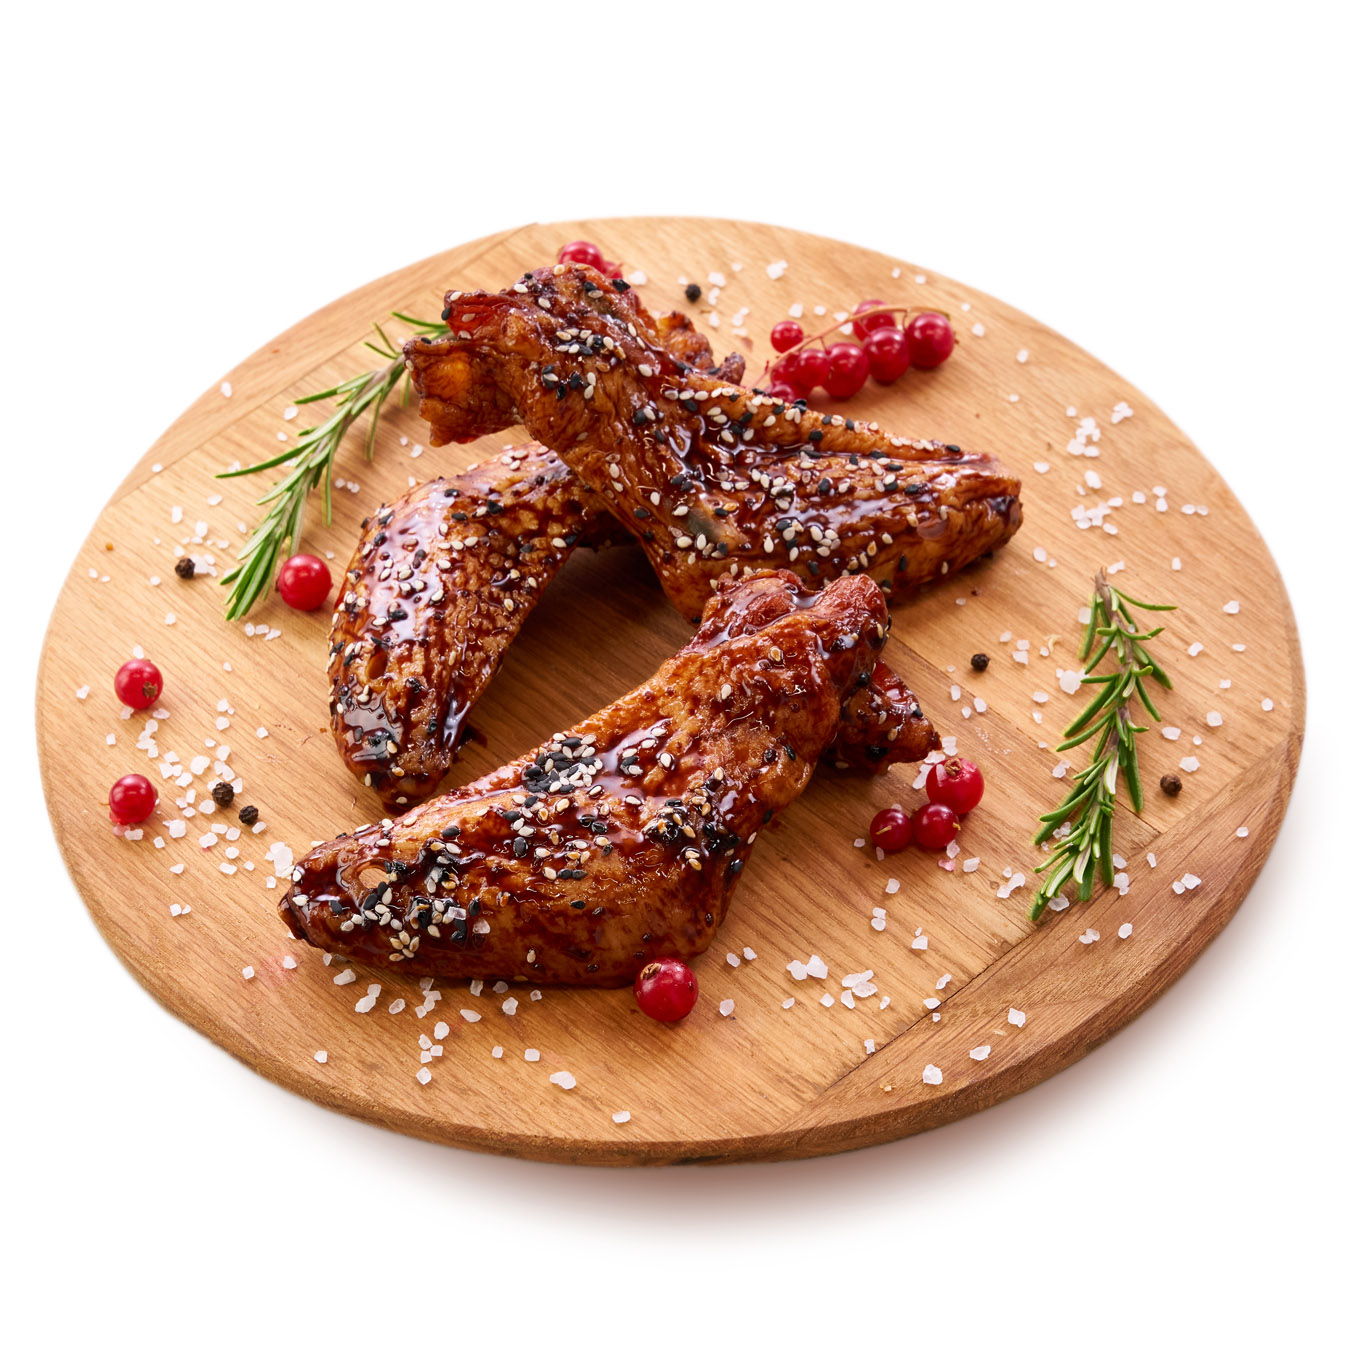 Smoked-baked glazed chicken wings